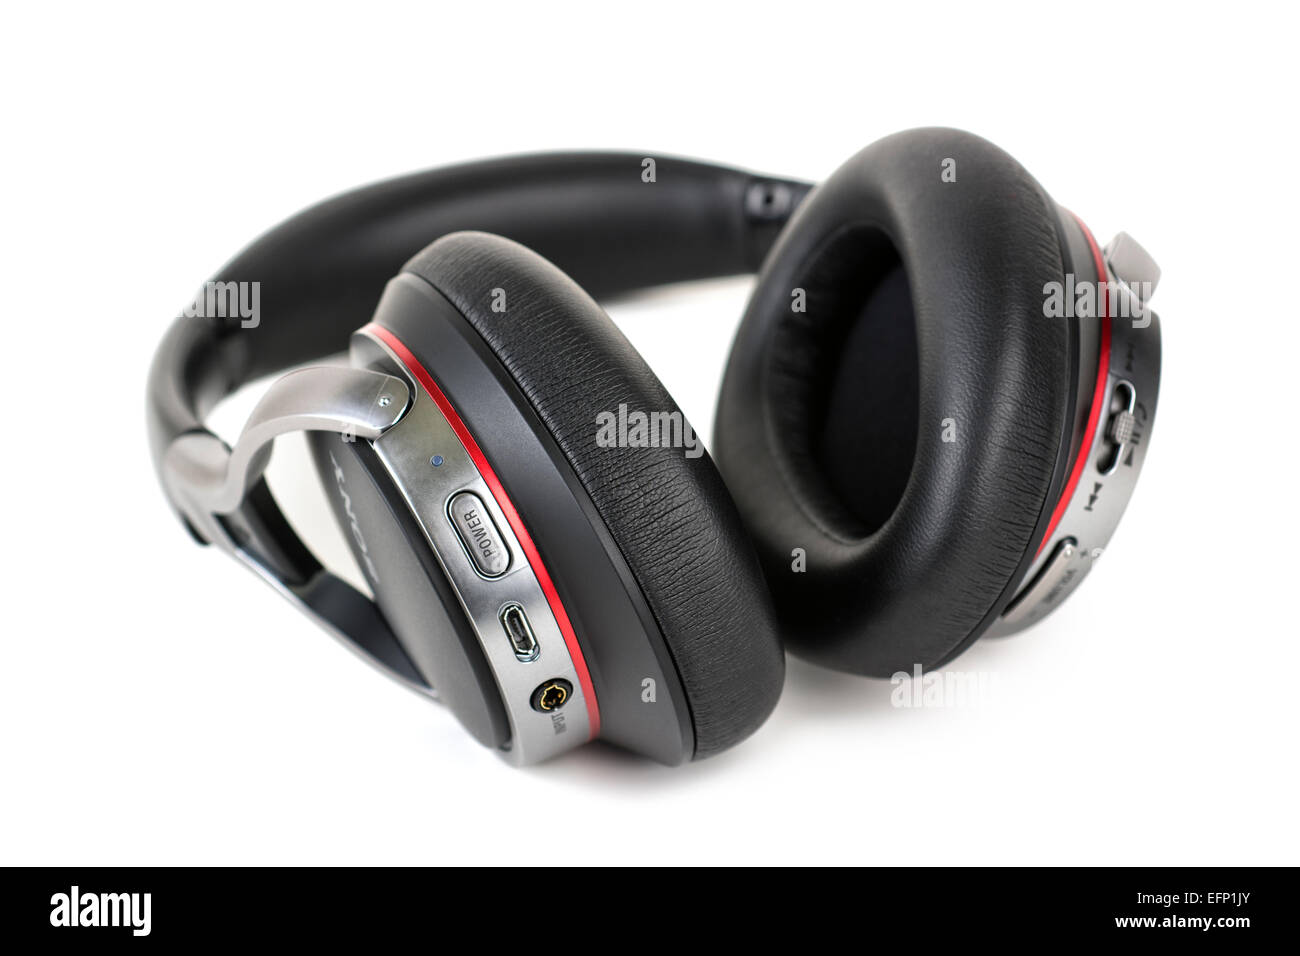 Bluetooth Wireless Headphones, Headset with Microphone for Answering Phone Calls Stock Photo